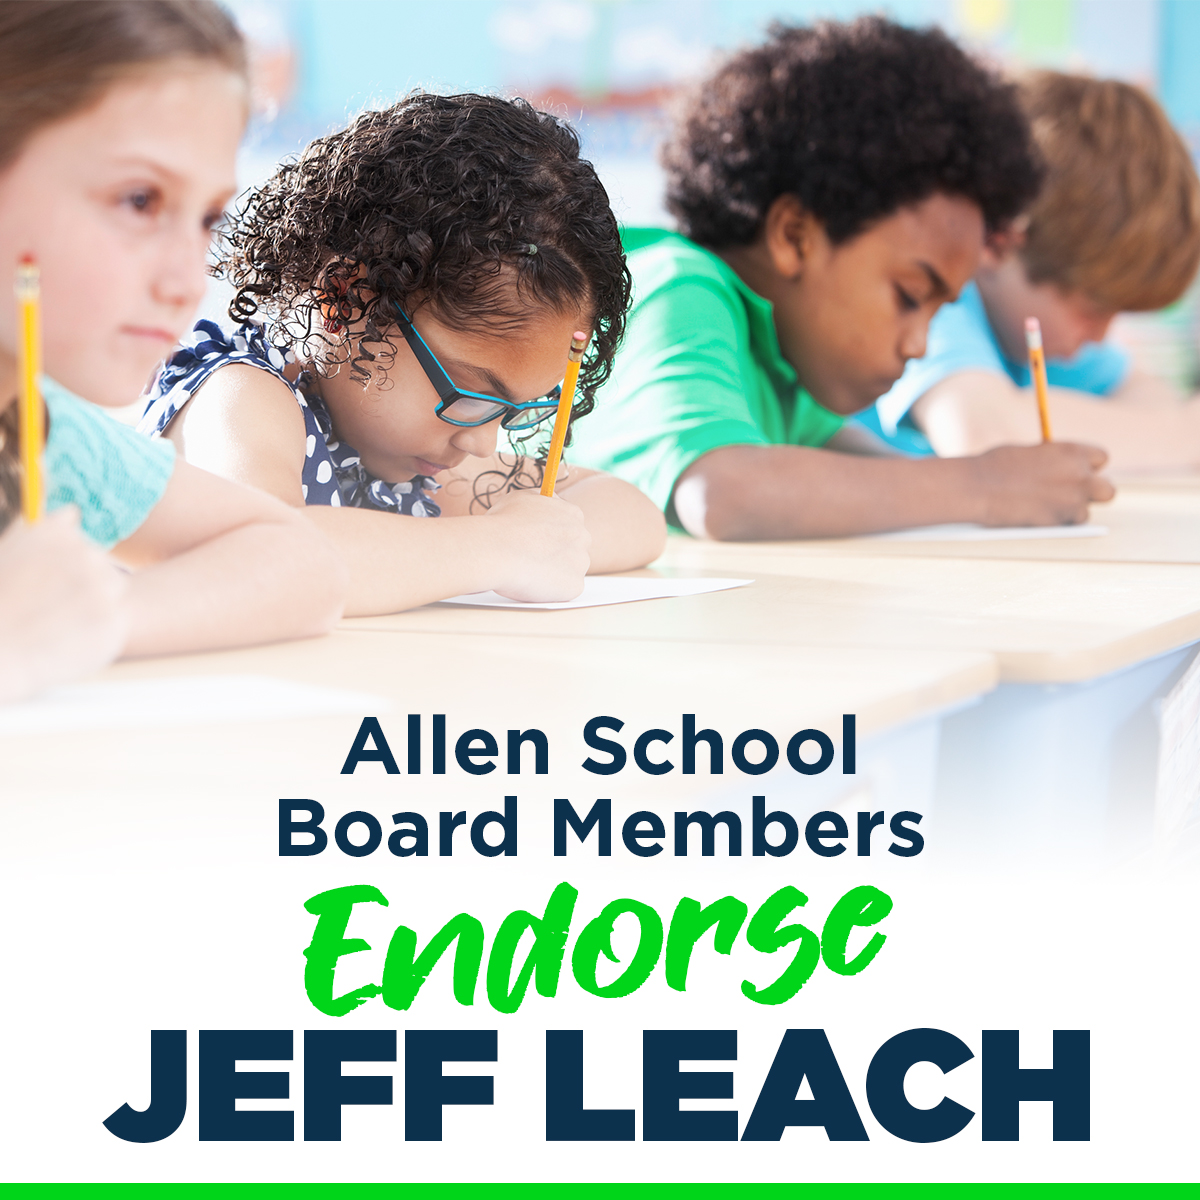 ALLEN ISD SCHOOL BOARD TRUSTEES ENDORSE AND SUPPORT STATE REP. JEFF LEACH FOR RE-ELECTION